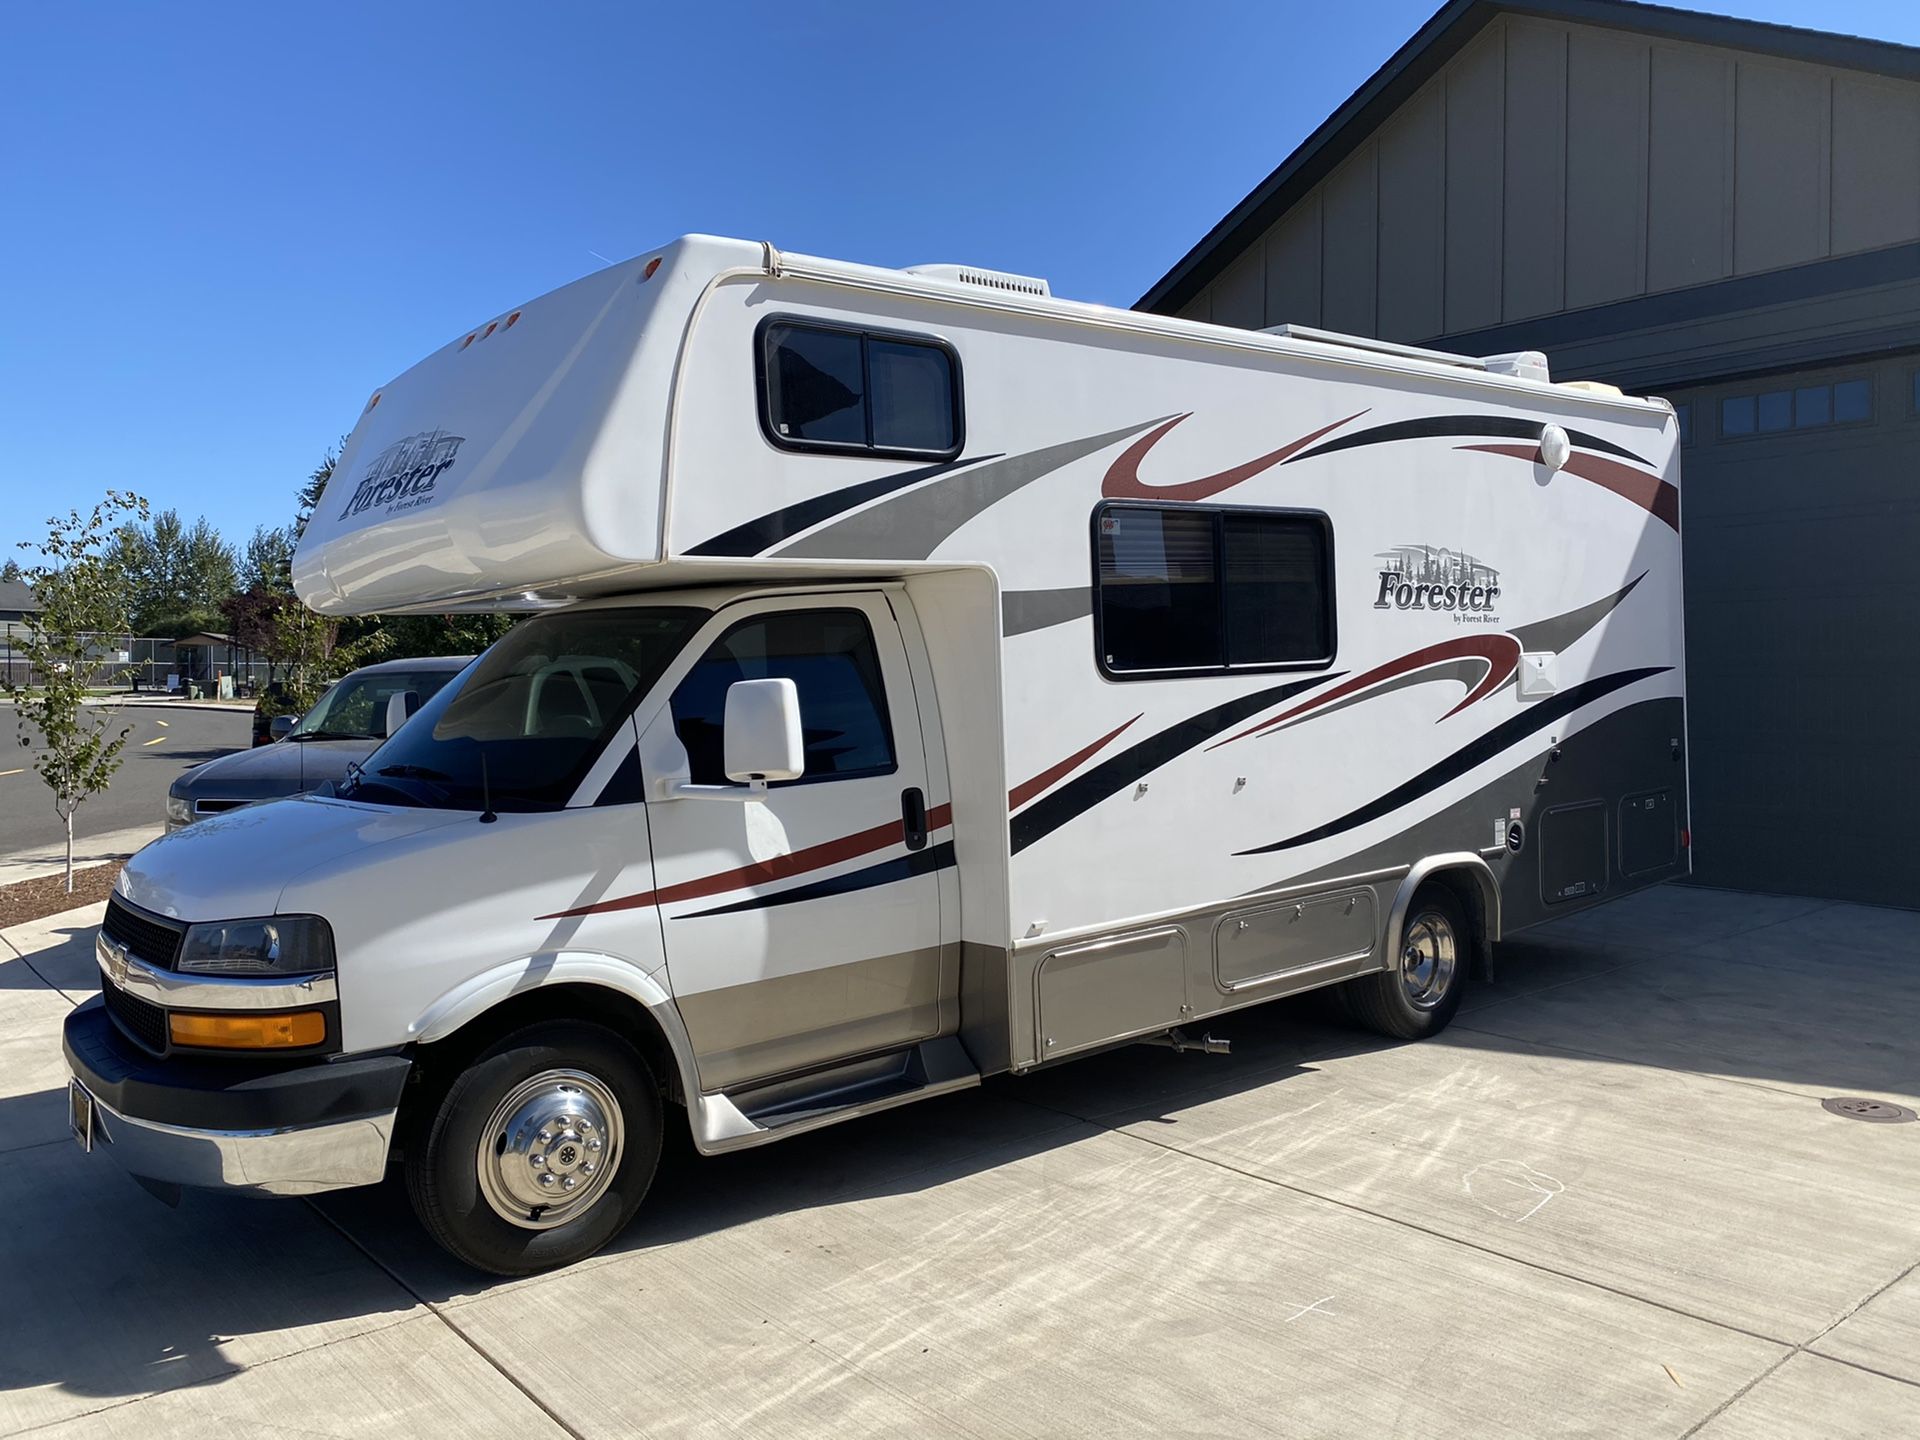 2011 Chevy Forester, 24’ Class C RV.